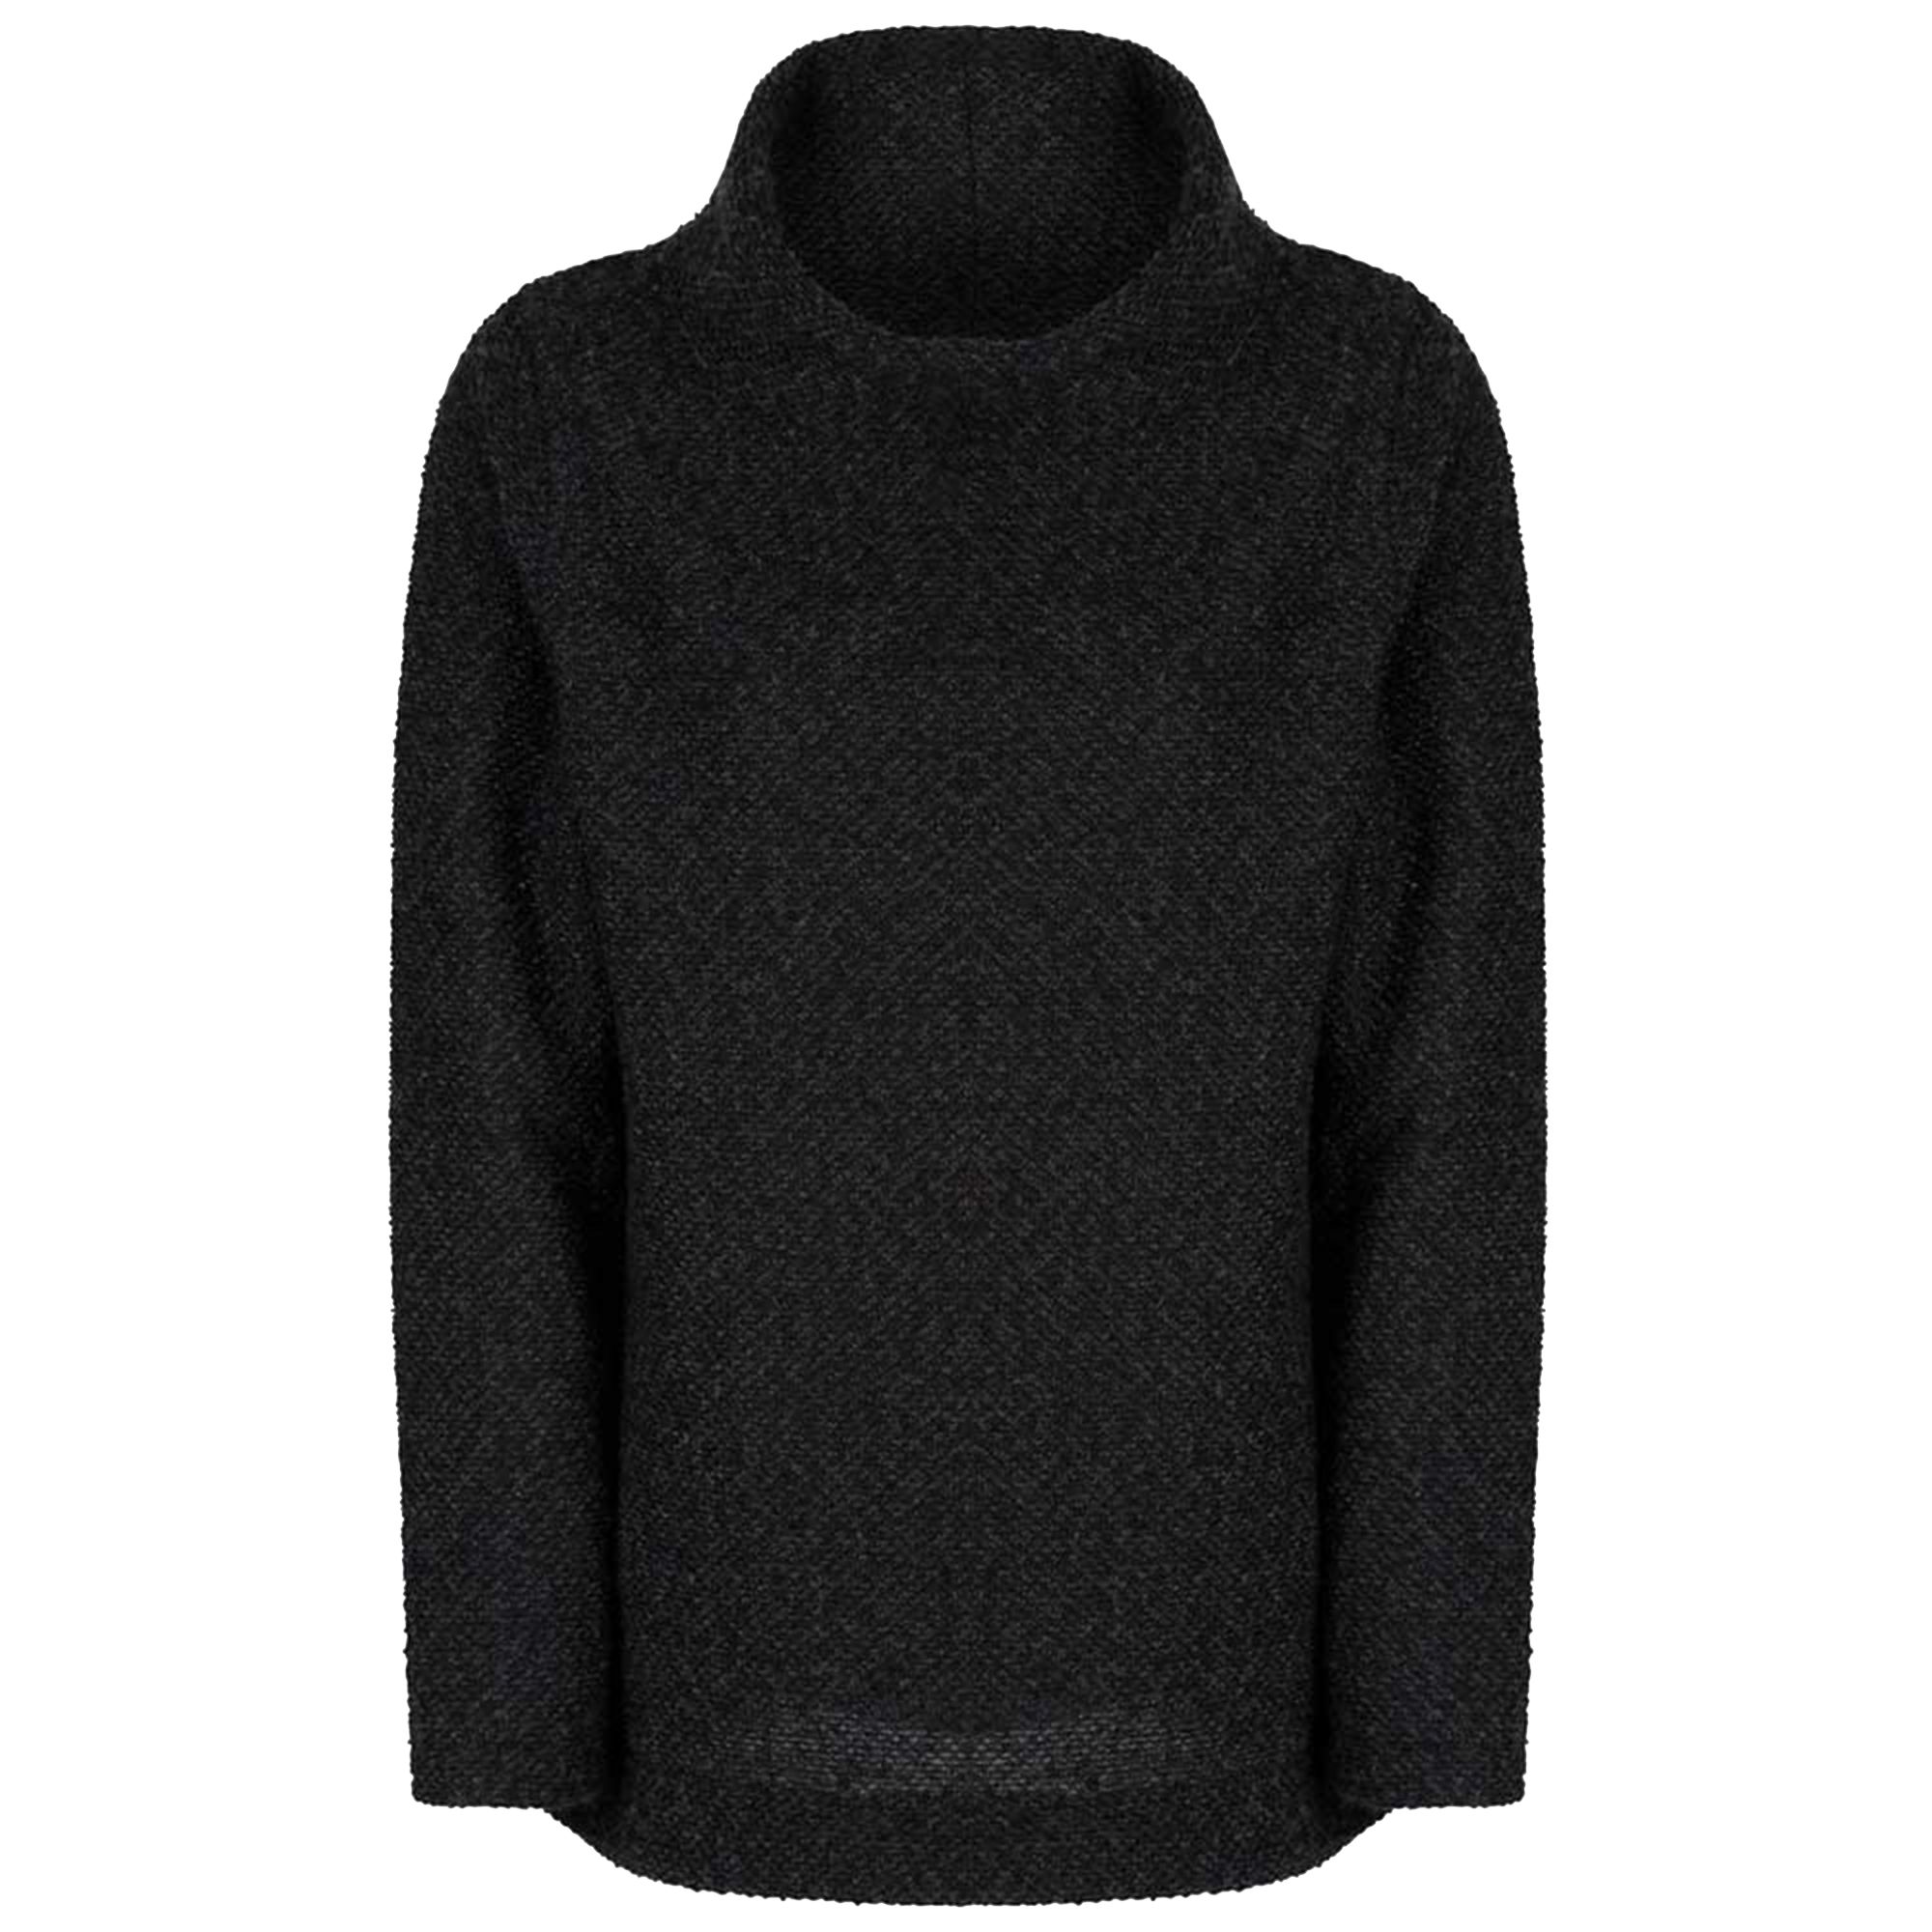 Womens jumper made of 310gsm Polyester boucle fabric. Cowl neck style. Side vents with herringbone tape. 100% Polyester.